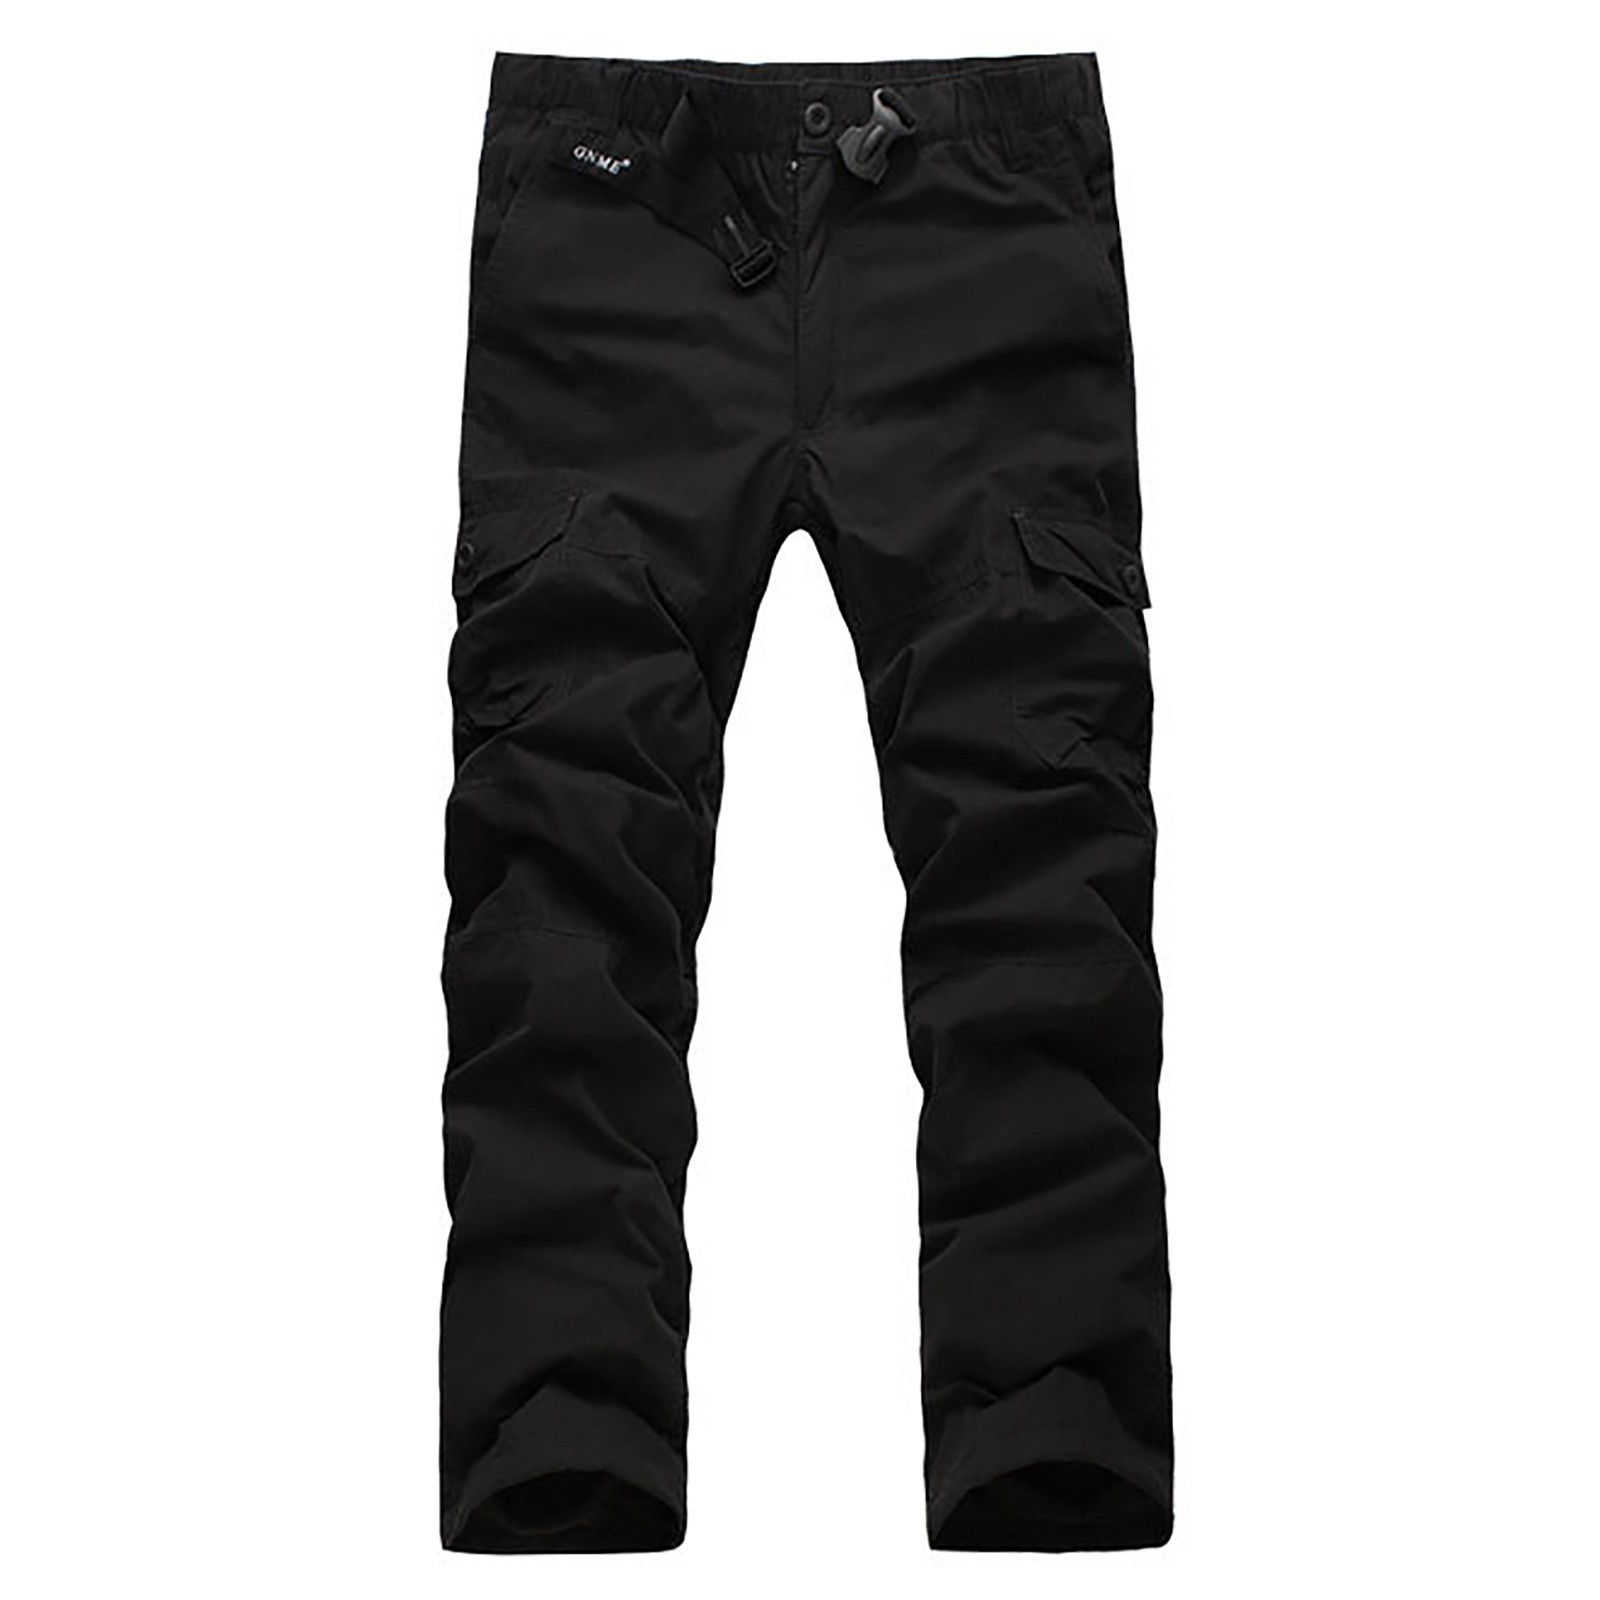 Inleife Mens Cargo Pants Clearance Men's Plus Size Cargo Trousers Work ...